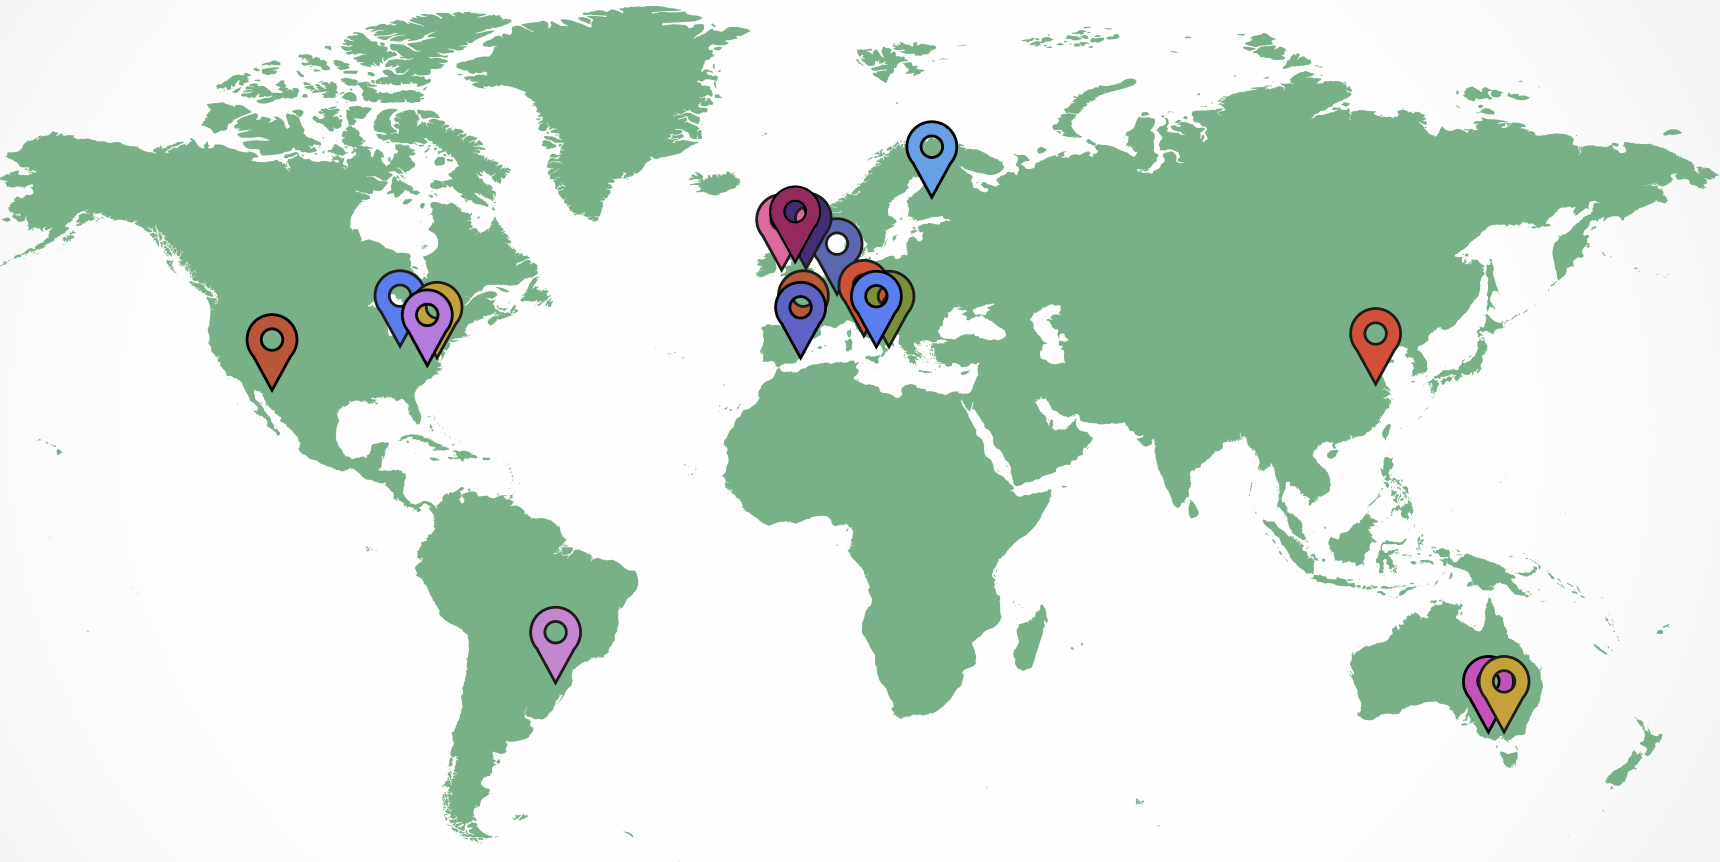 World map with pins dropped at each of the data sharing locations.